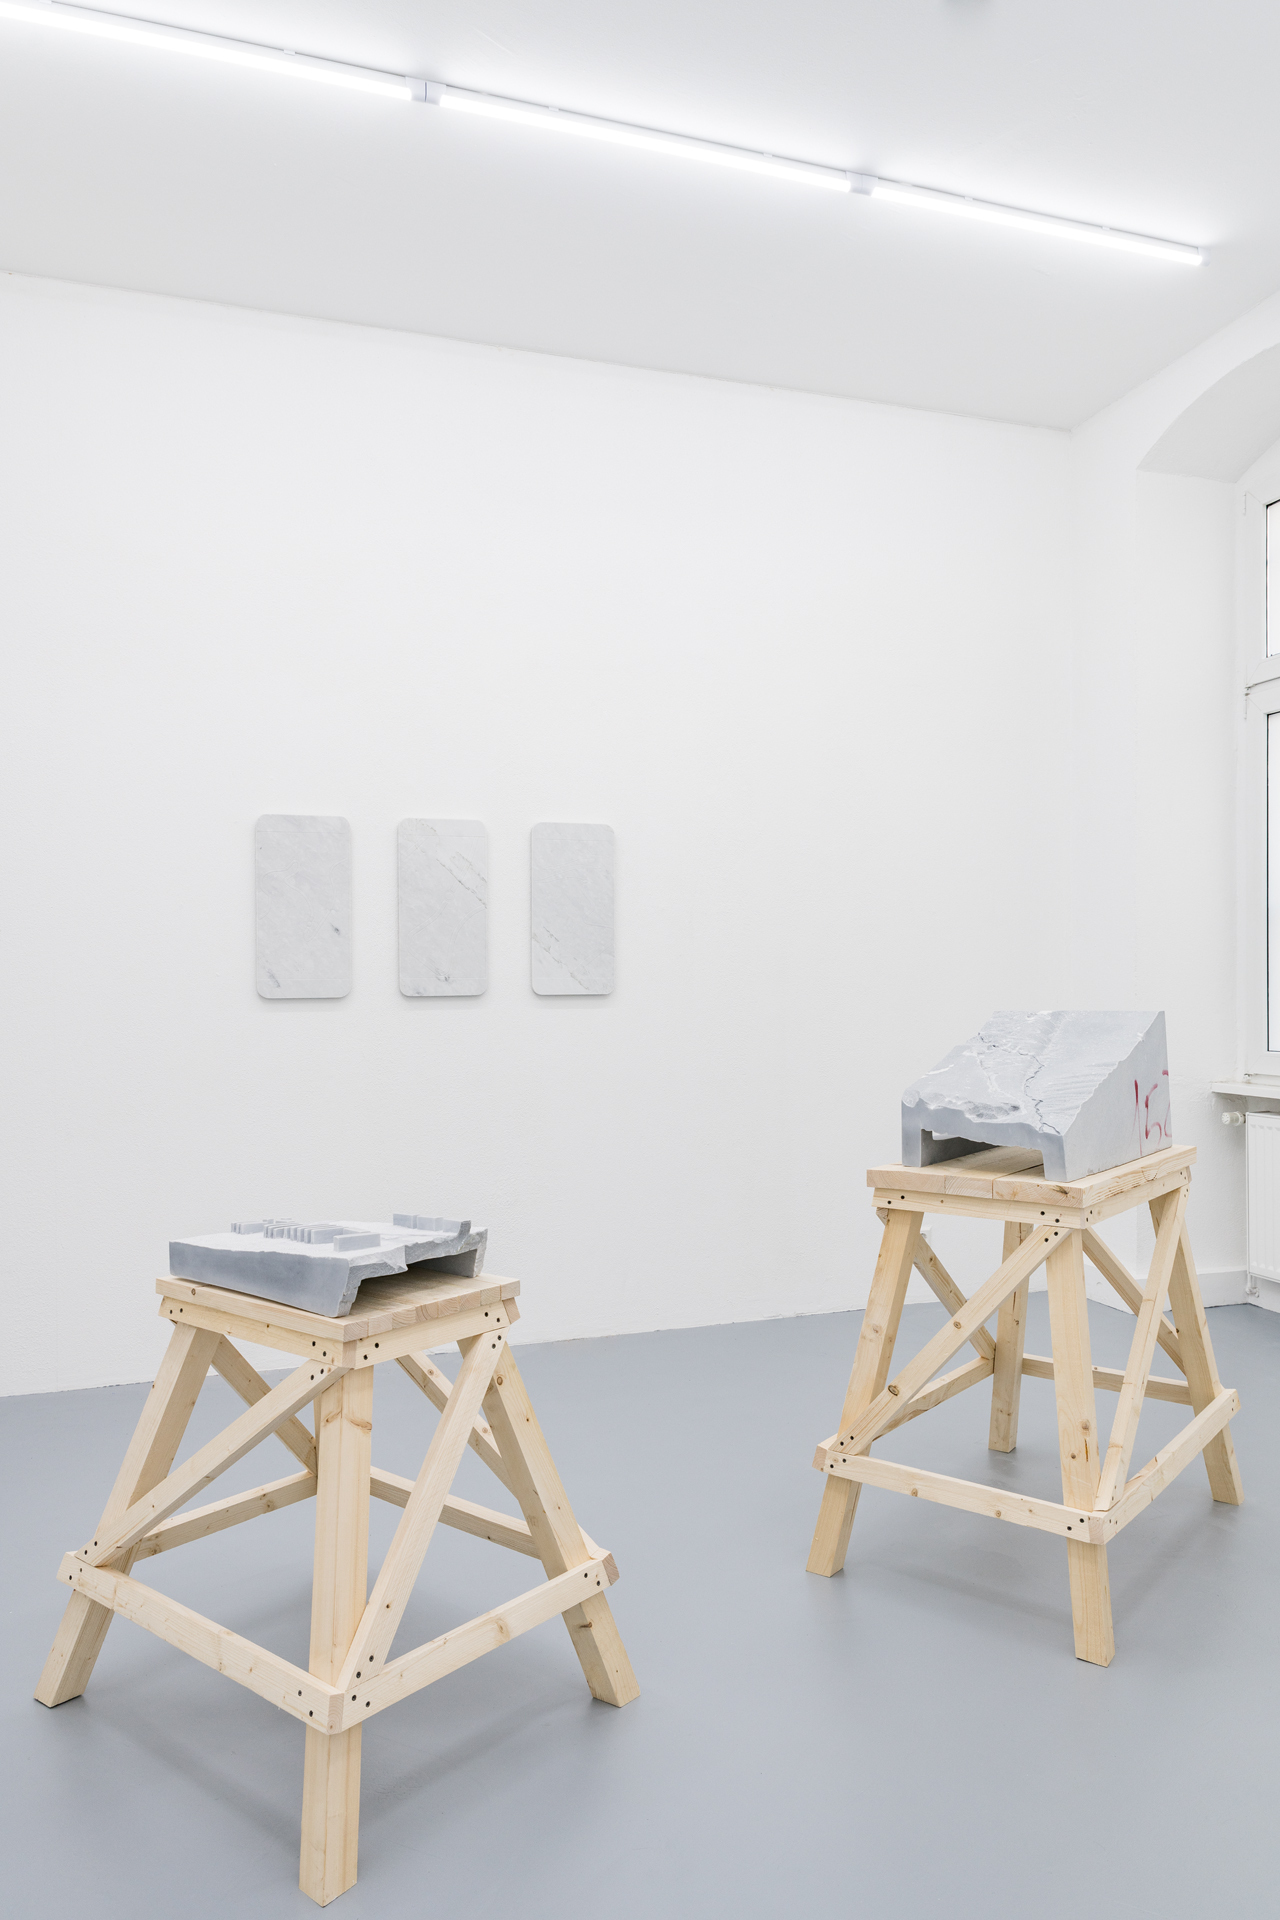 Lukas Liese, Whose Street installation view, Marble, Variable Dimensions.